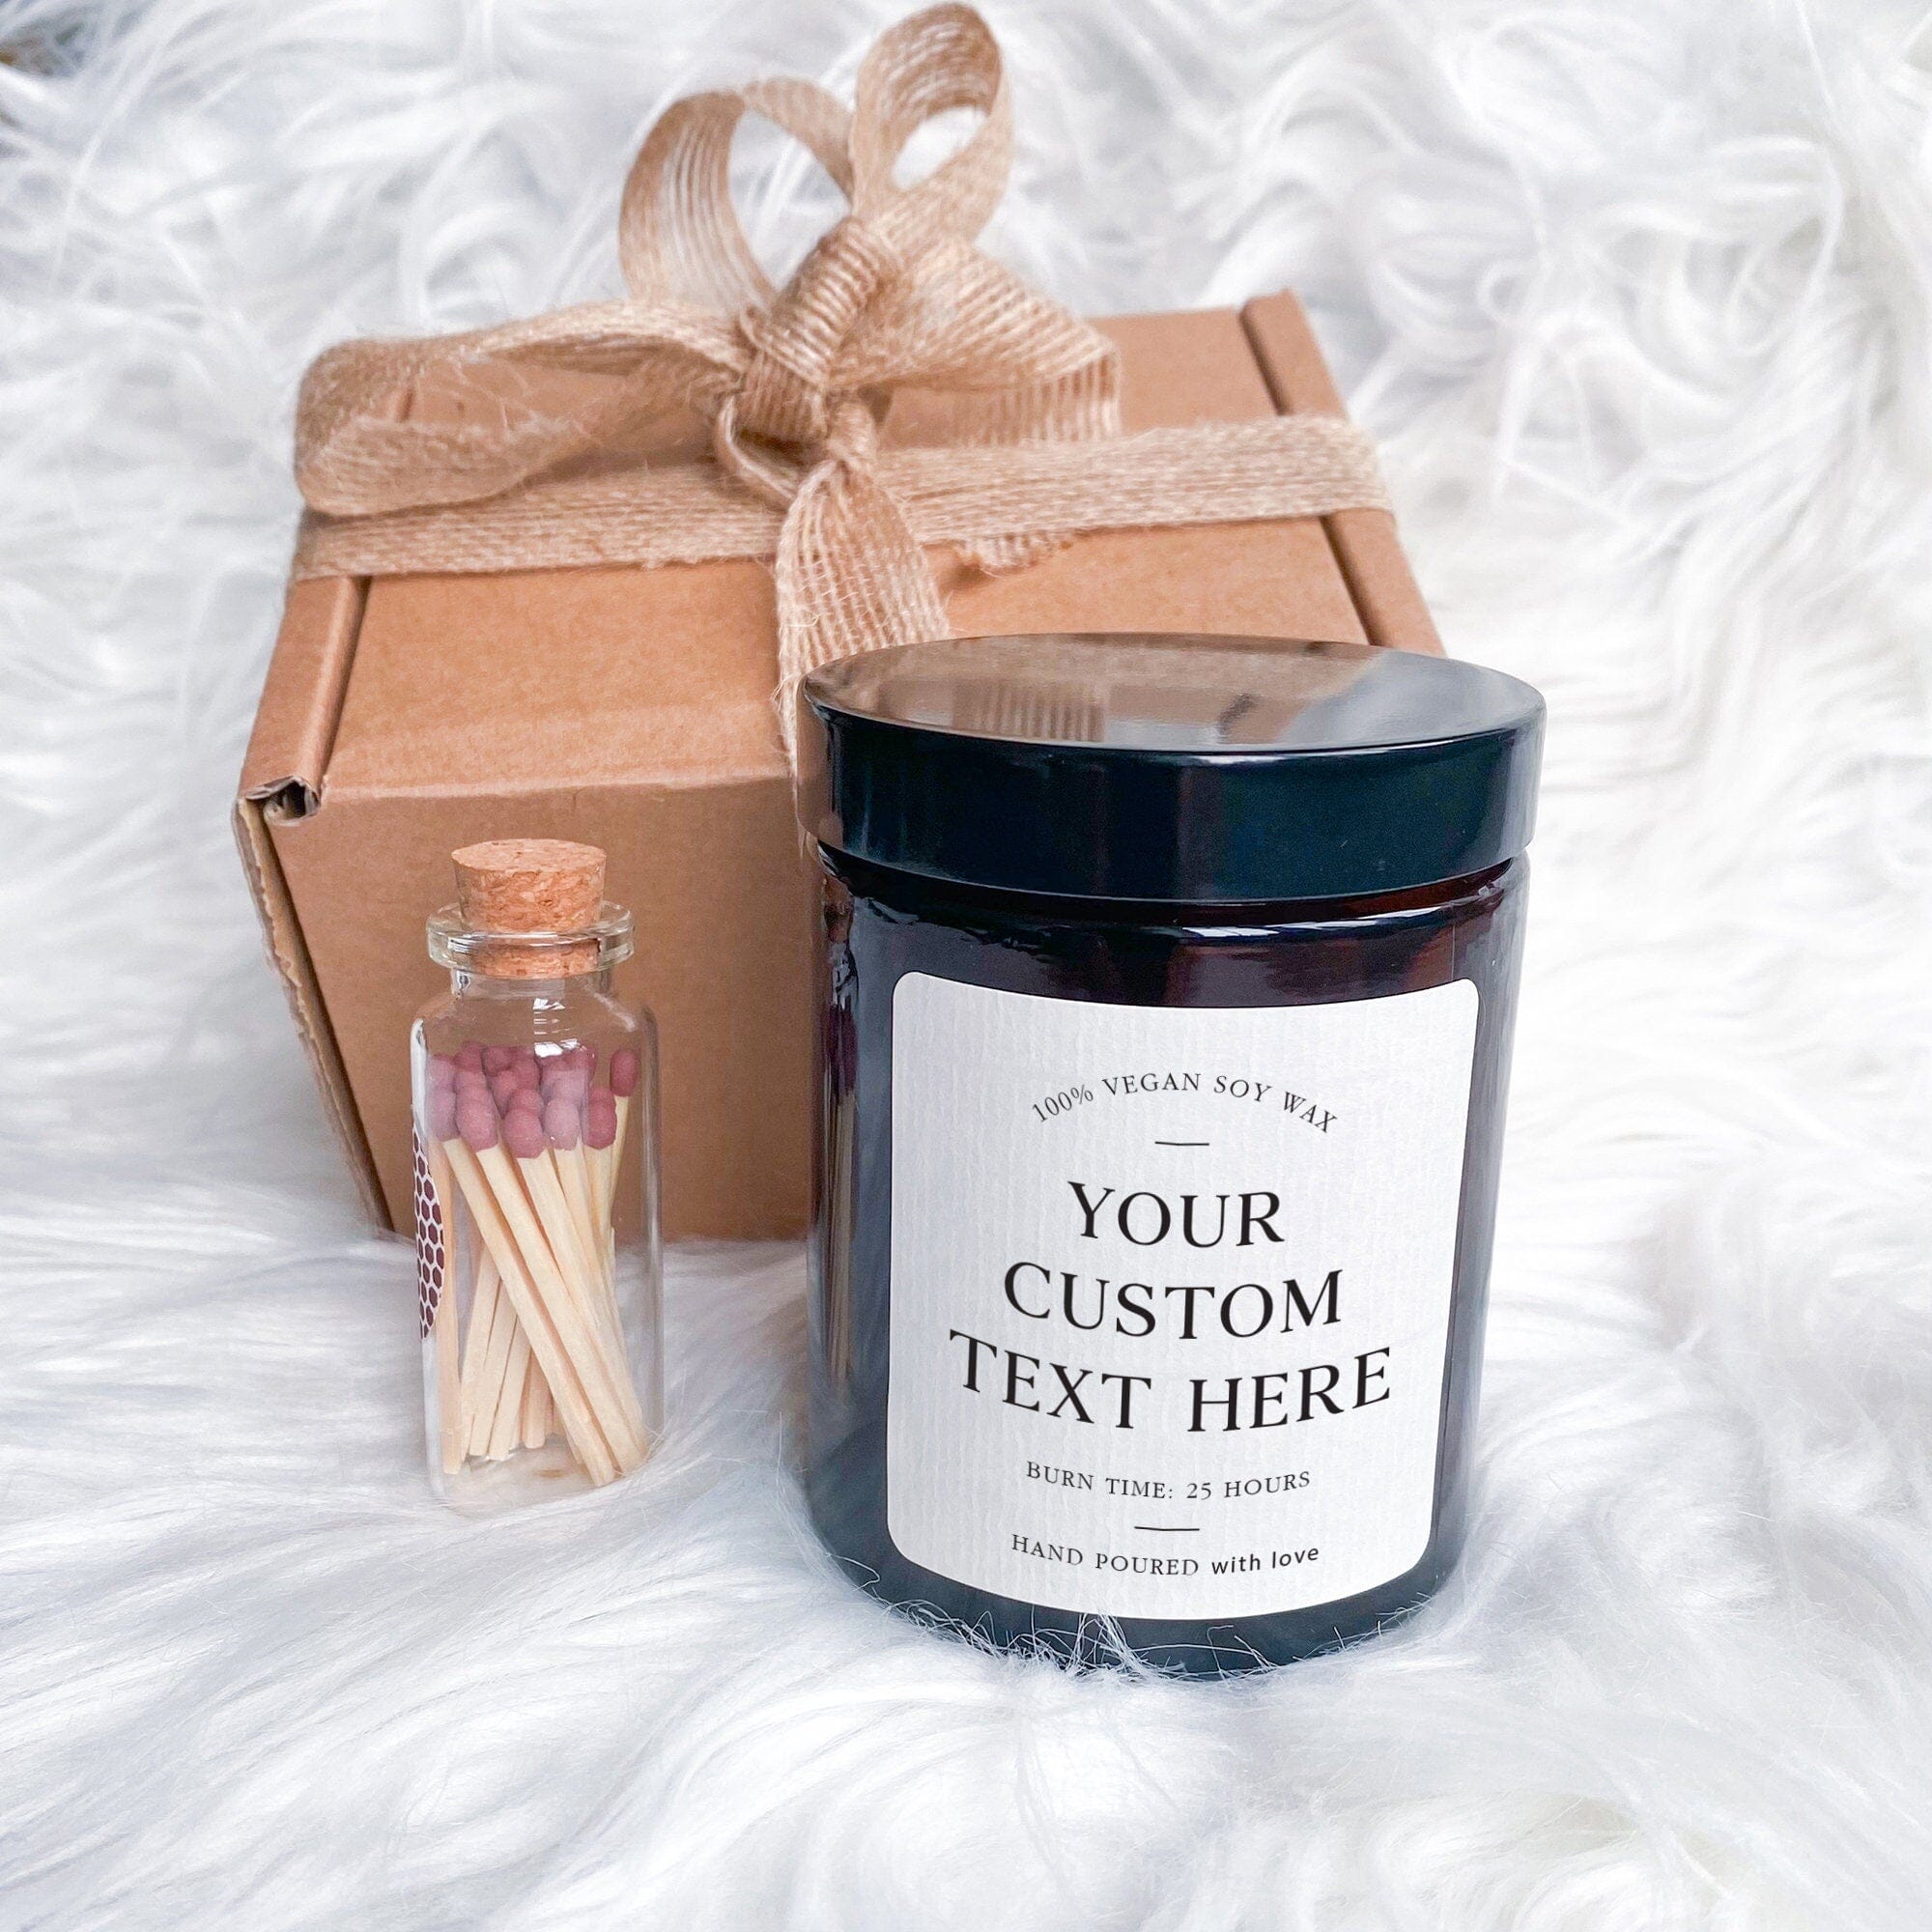 Custom text soy wax vegan candle, Your own text, Christmas gift for friend mum dad grandma colleague employee